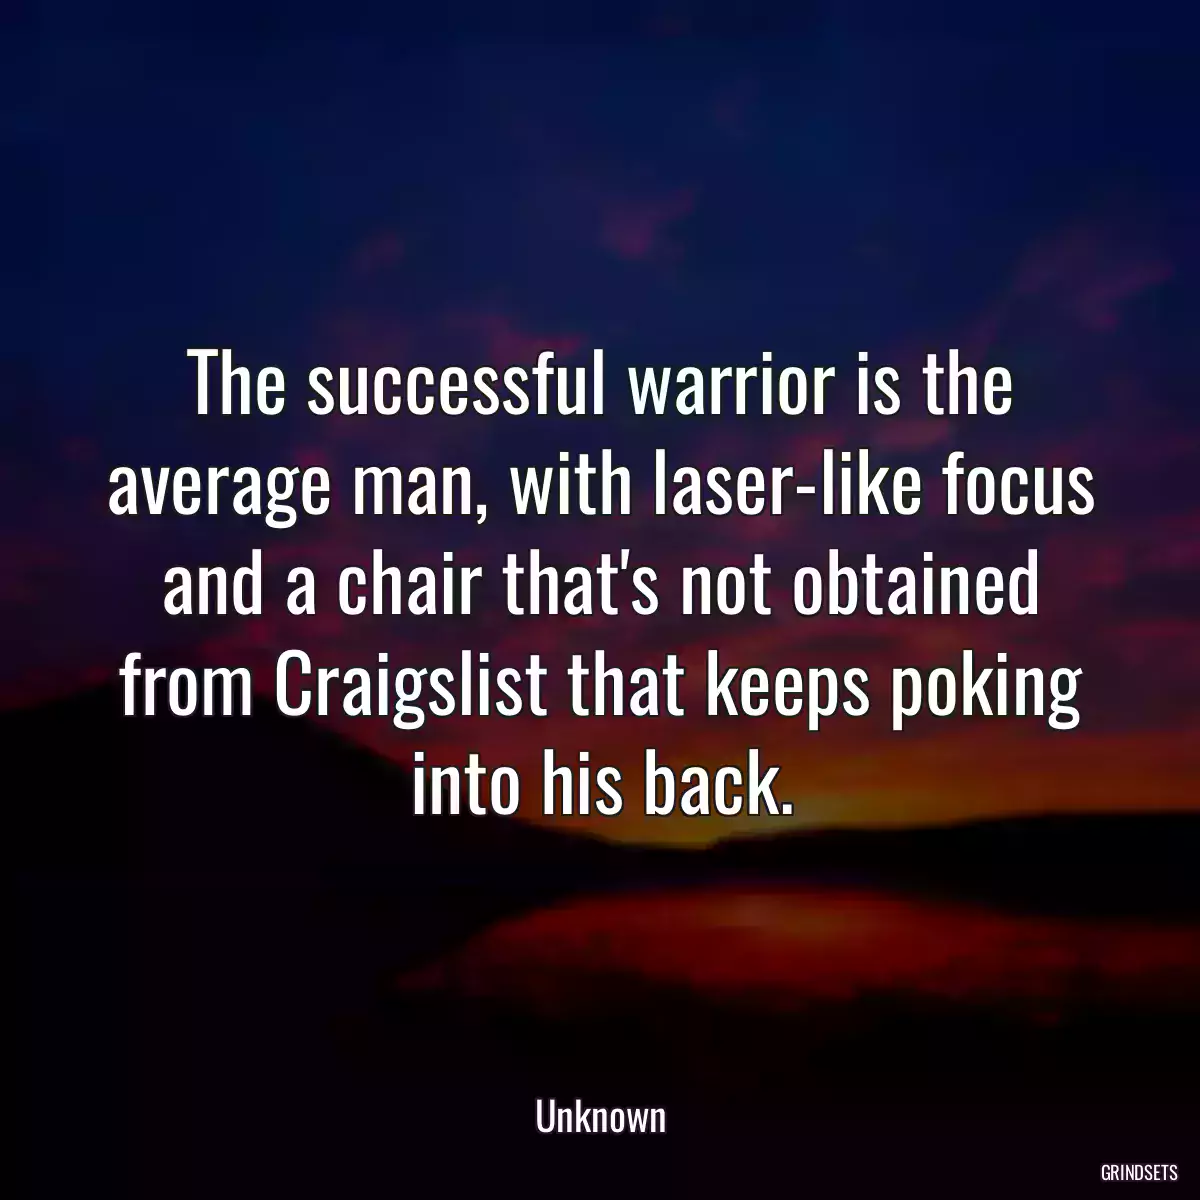 The successful warrior is the average man, with laser-like focus and a chair that\'s not obtained from Craigslist that keeps poking into his back.